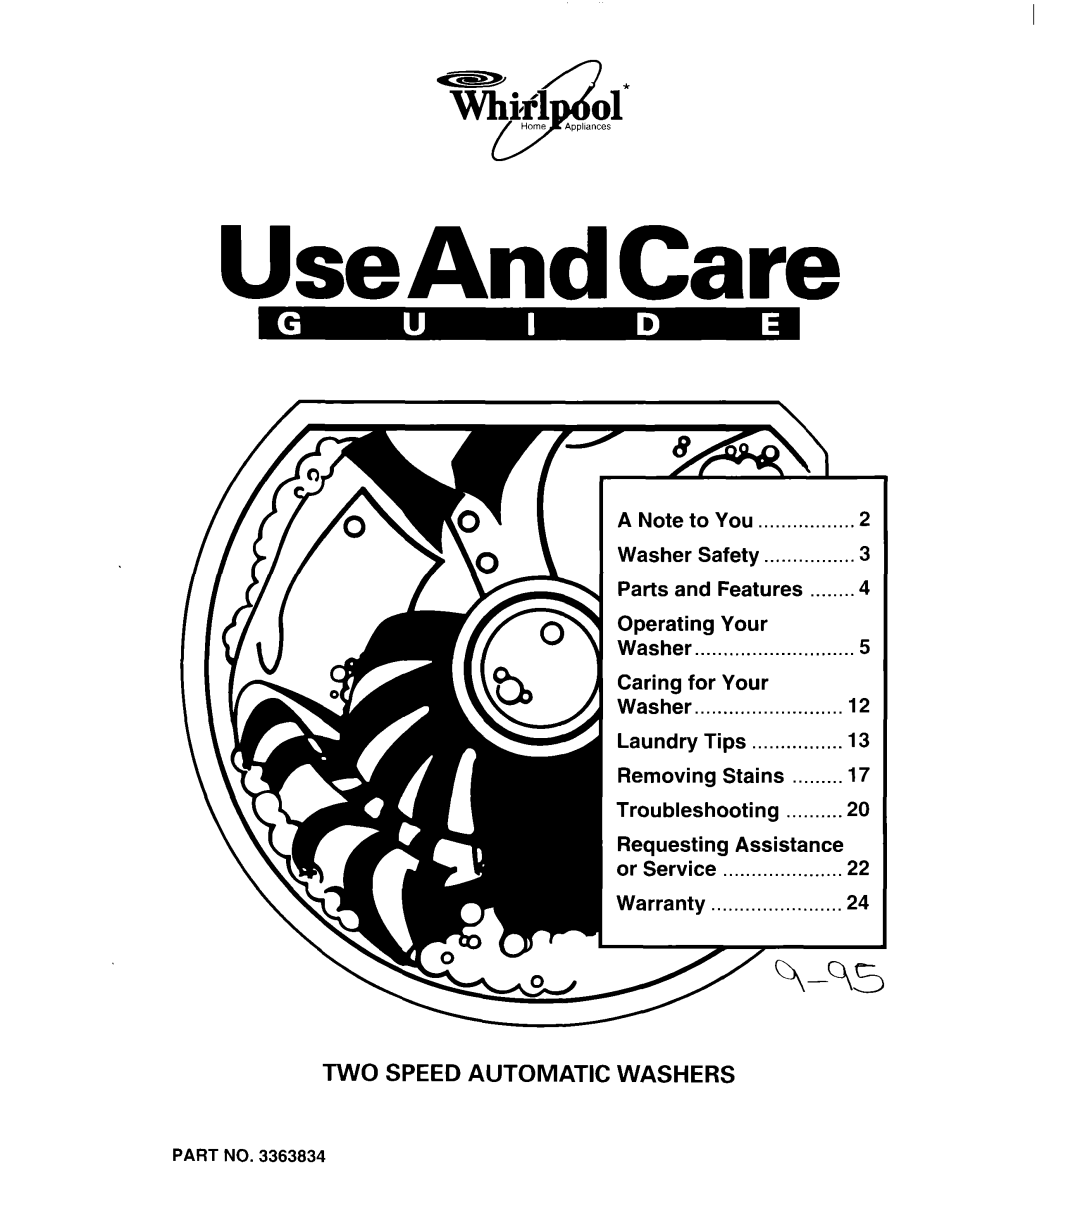 Whirlpool 3363834 warranty UseAndCare, Two Speed Automatic Washers 